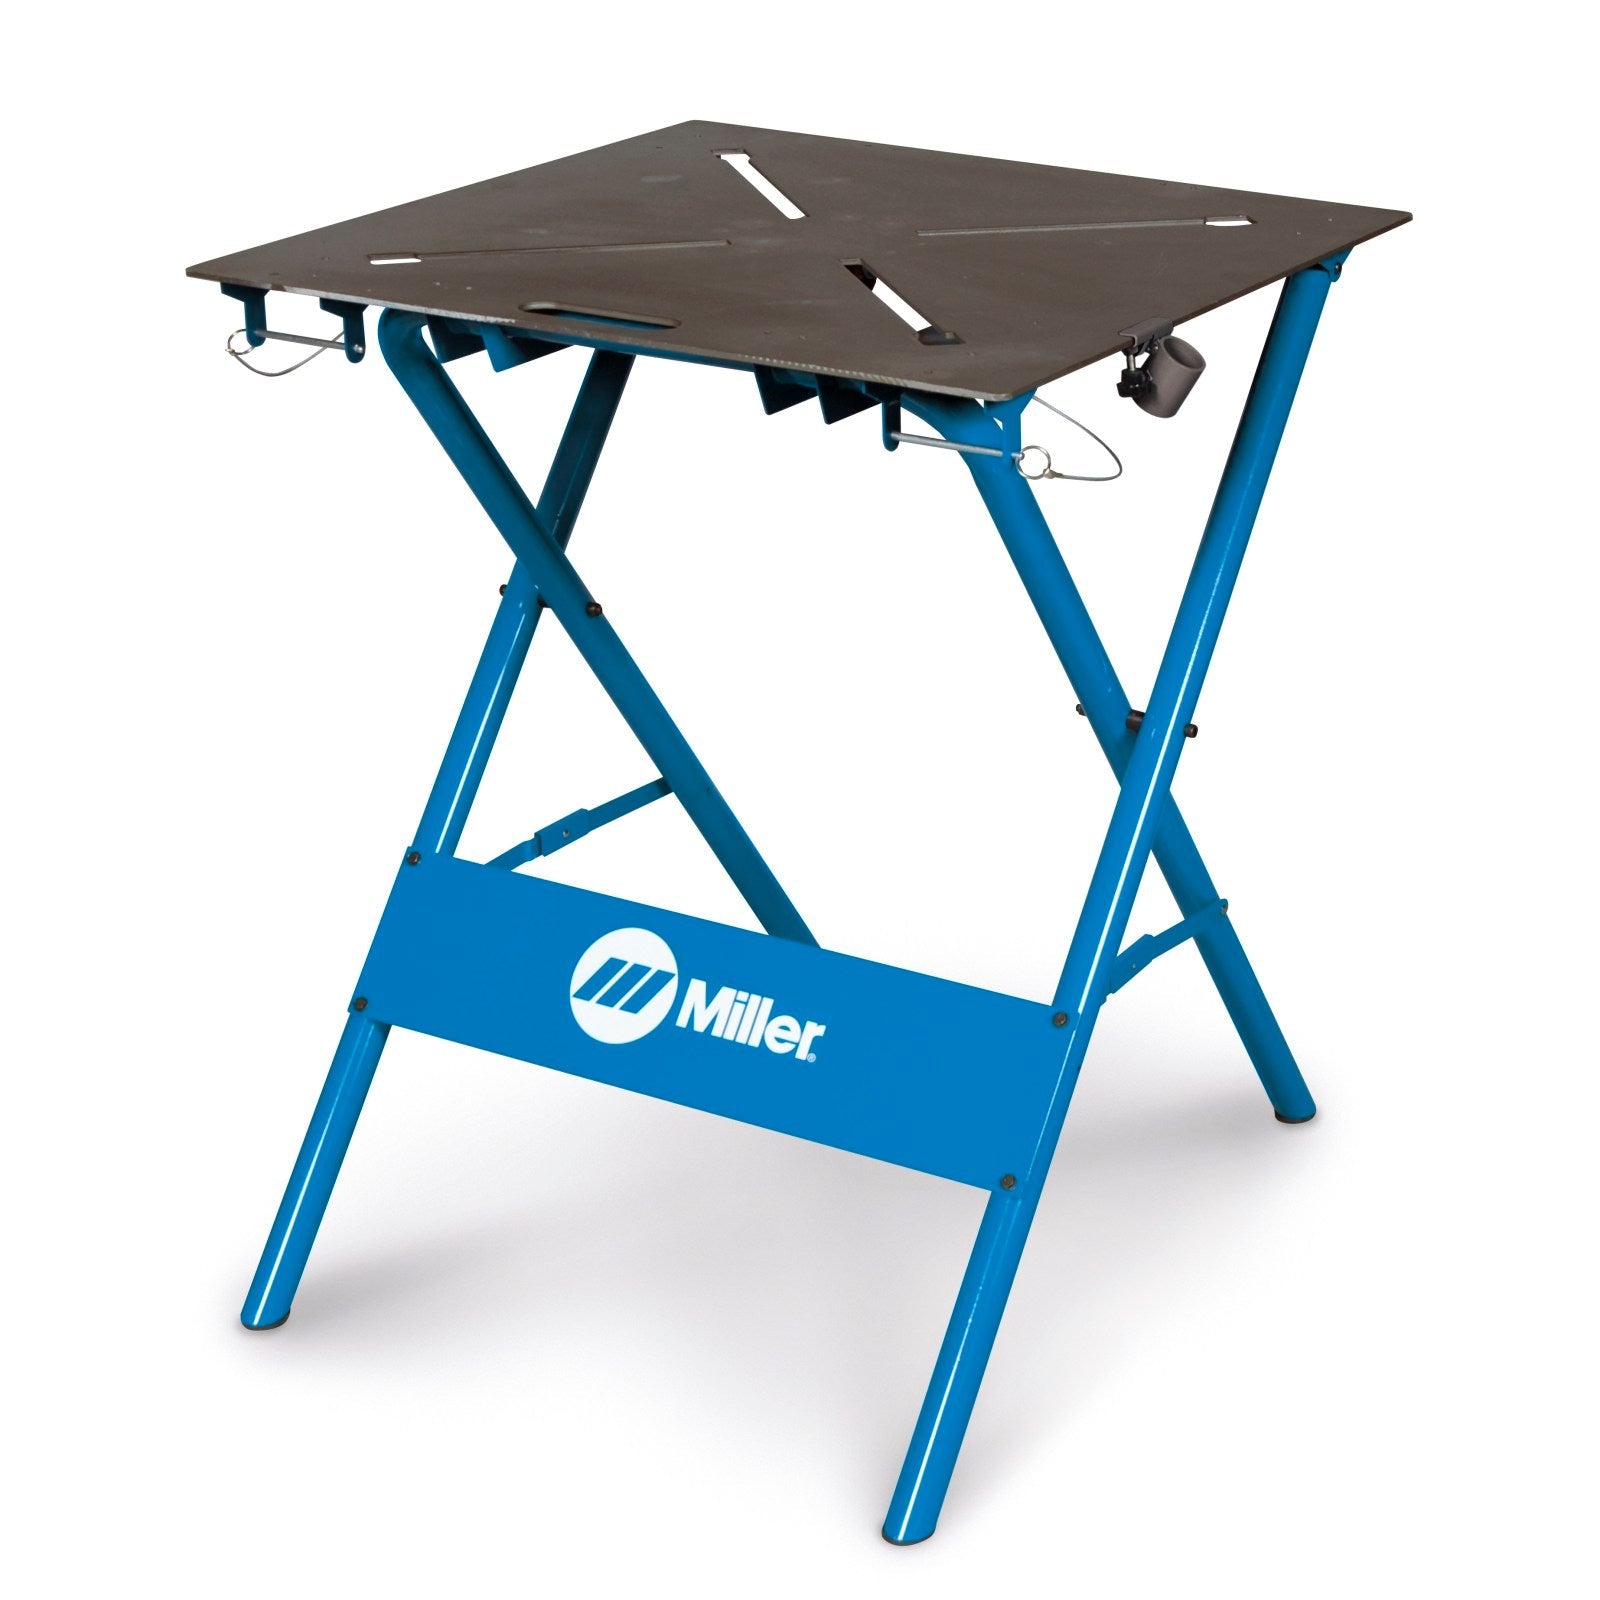 Miller 30FX Folding ArcStation Work Bench with 2 X-Clamps (300837)